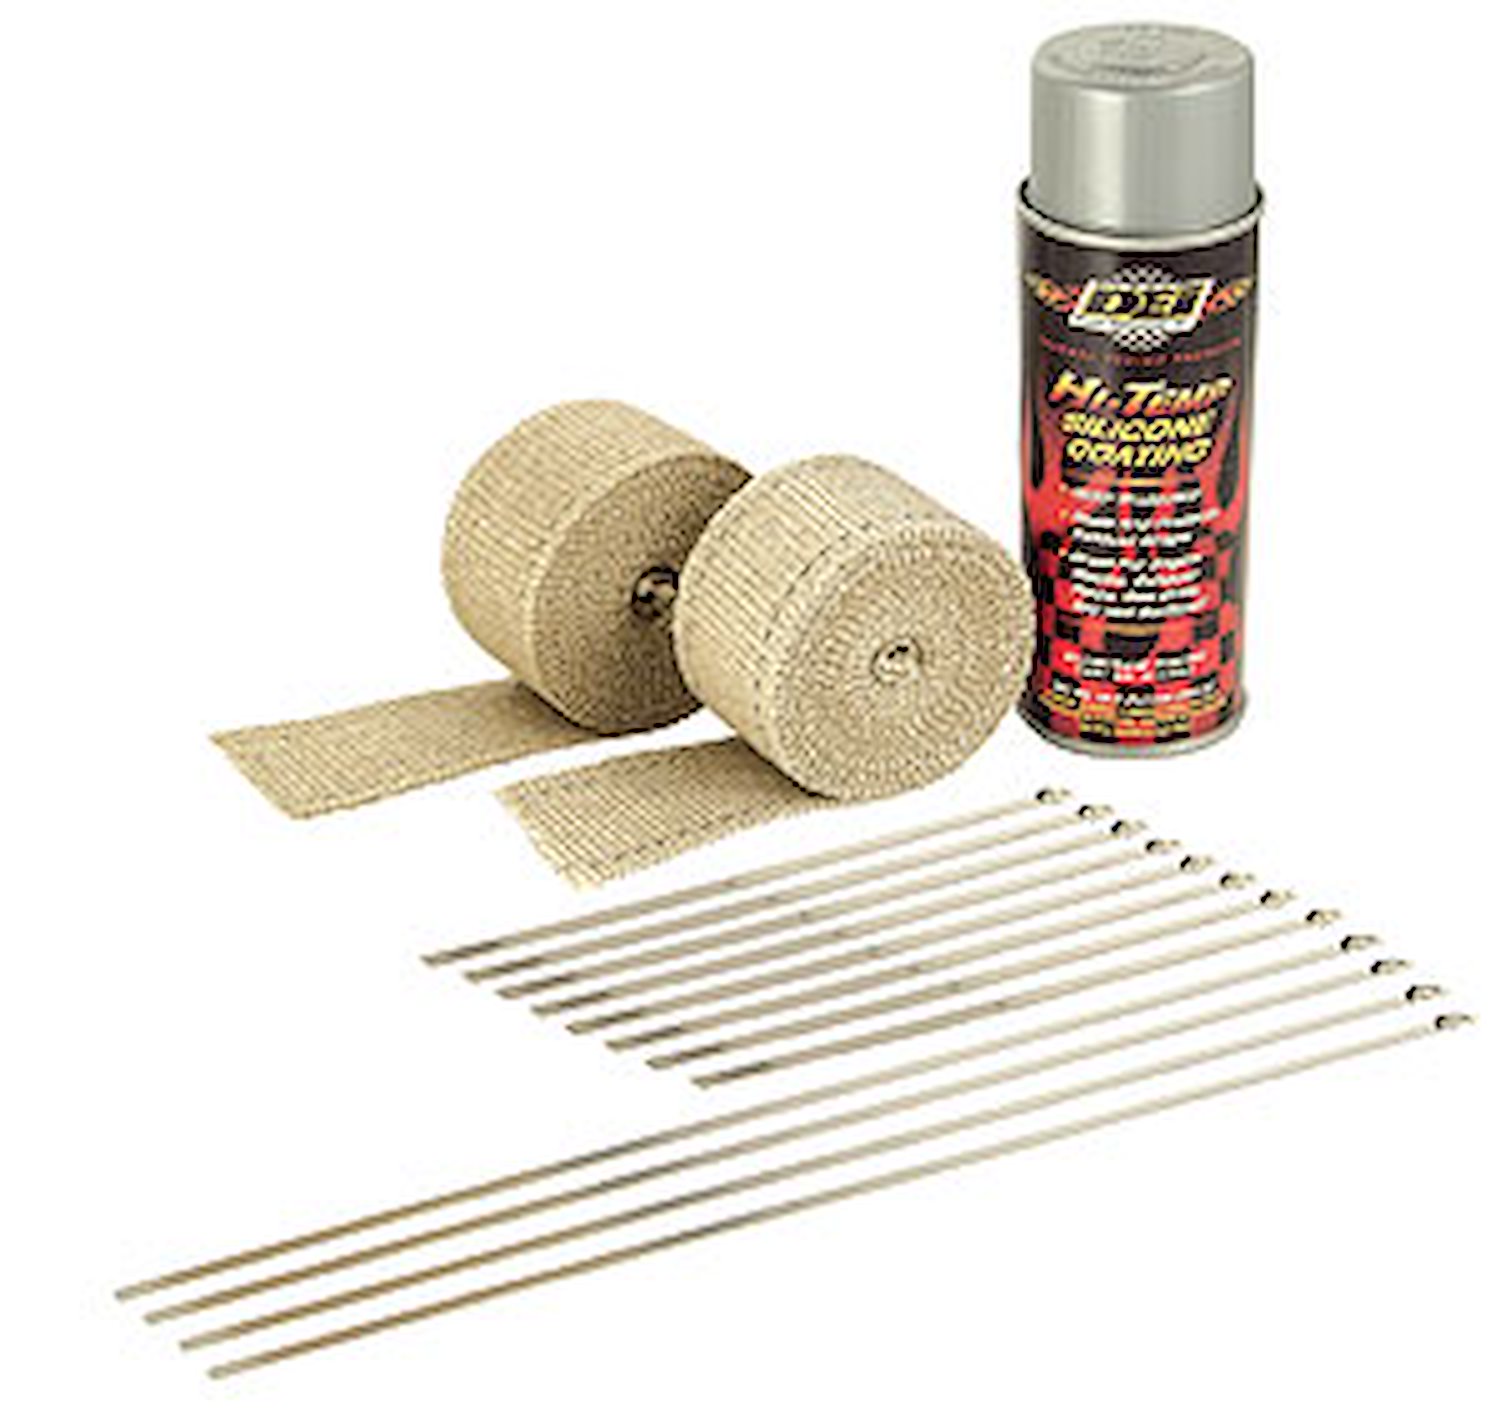 Motorcycle Exhaust Pipe Wrap Kit With Aluminum HT Silicone Coating